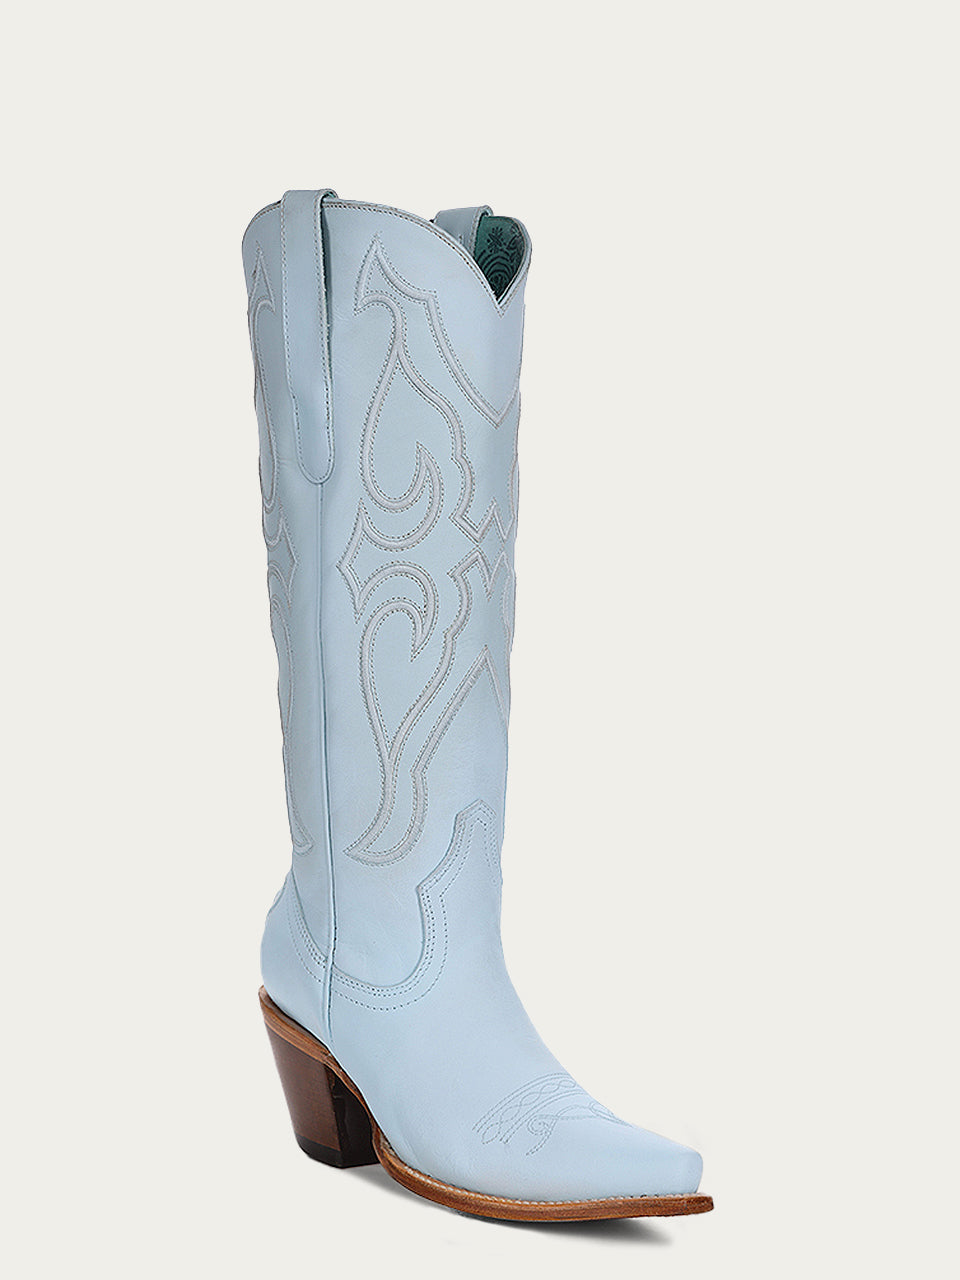 Z5254 - WOMEN'S BABY BLUE EMBROIDERY TALL TOP SNIP TOE COWBOY BOOT